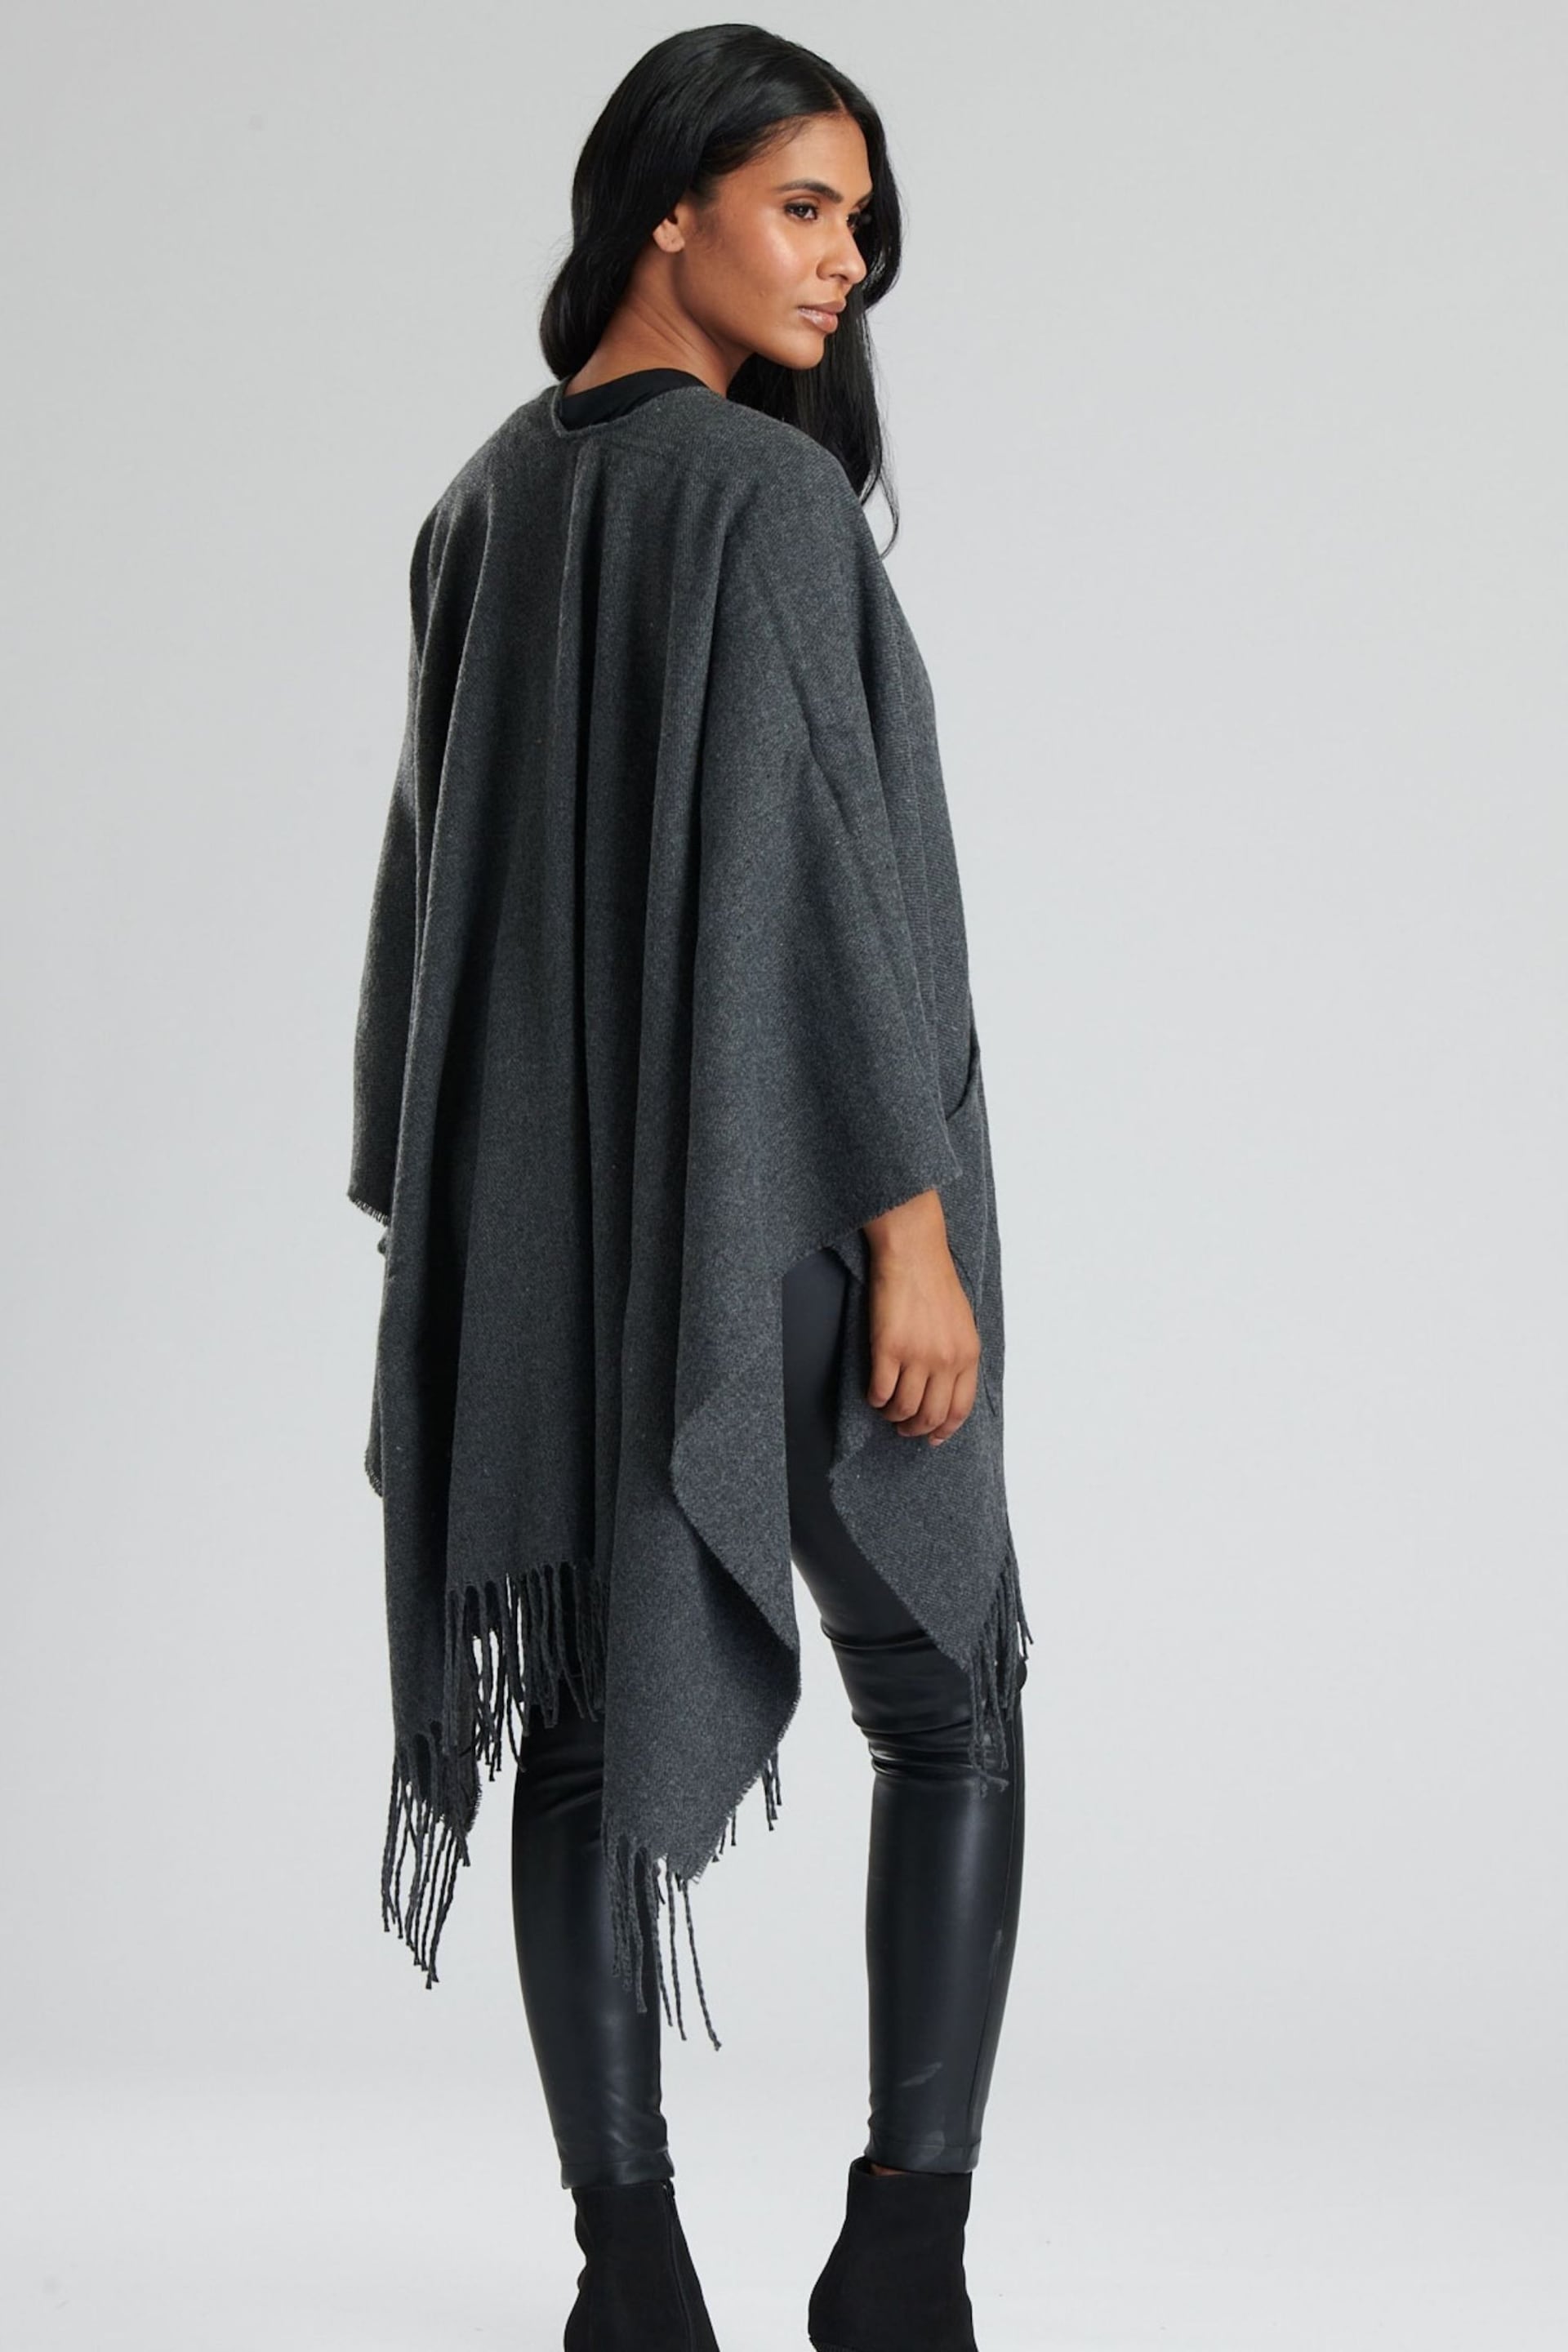 South Beach Grey Knitted Fringe Wrap - Image 4 of 4